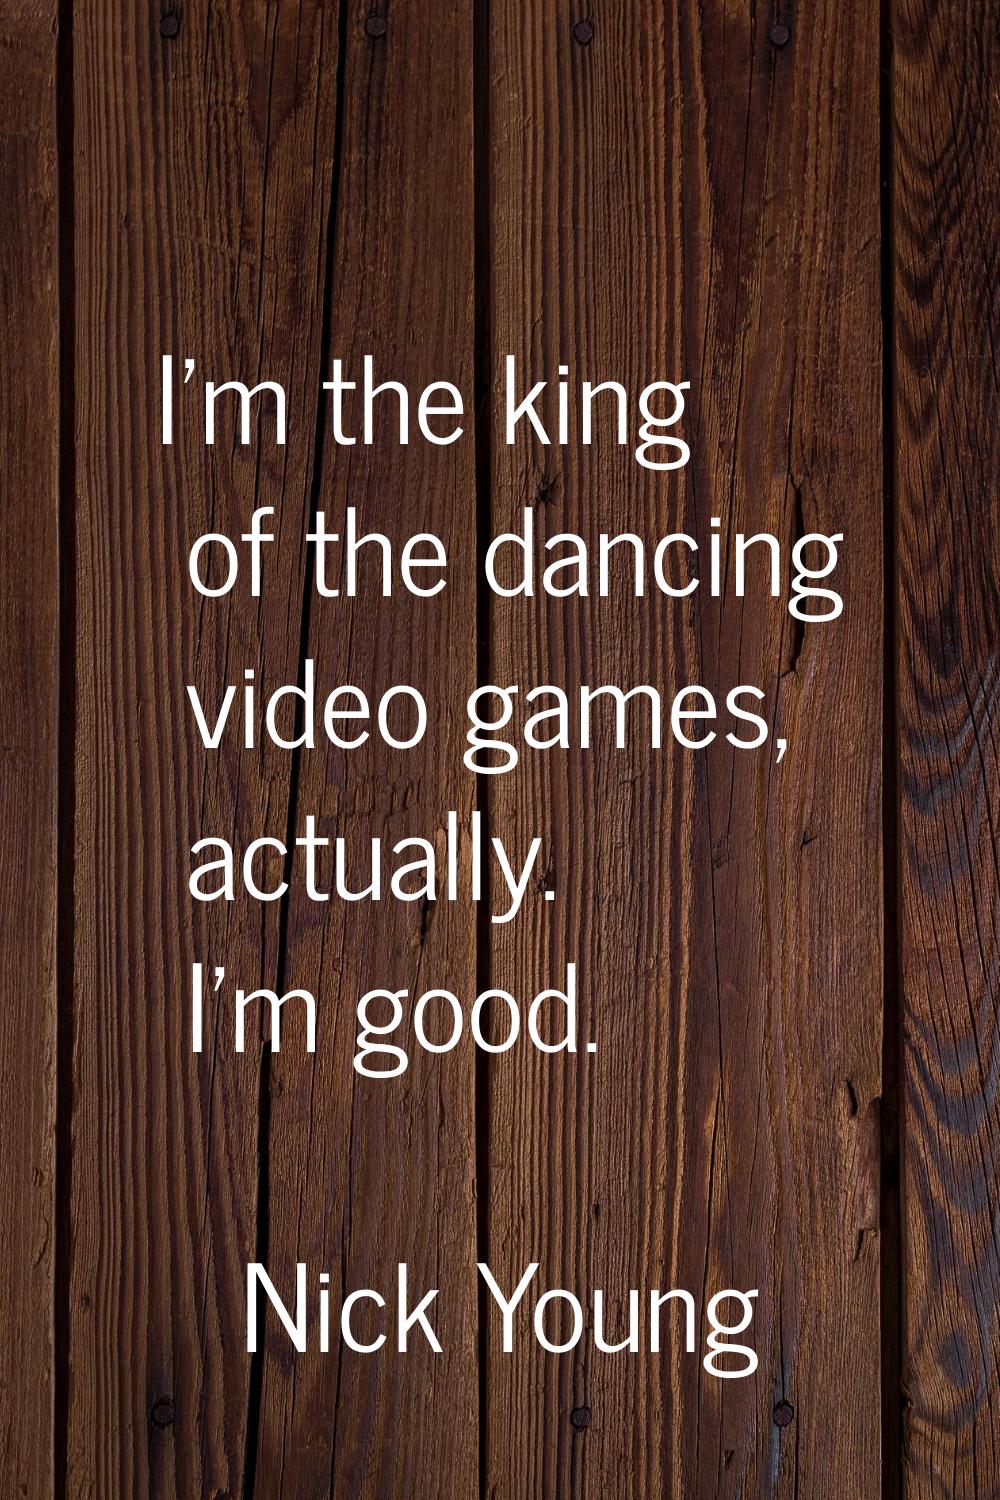 I'm the king of the dancing video games, actually. I'm good.